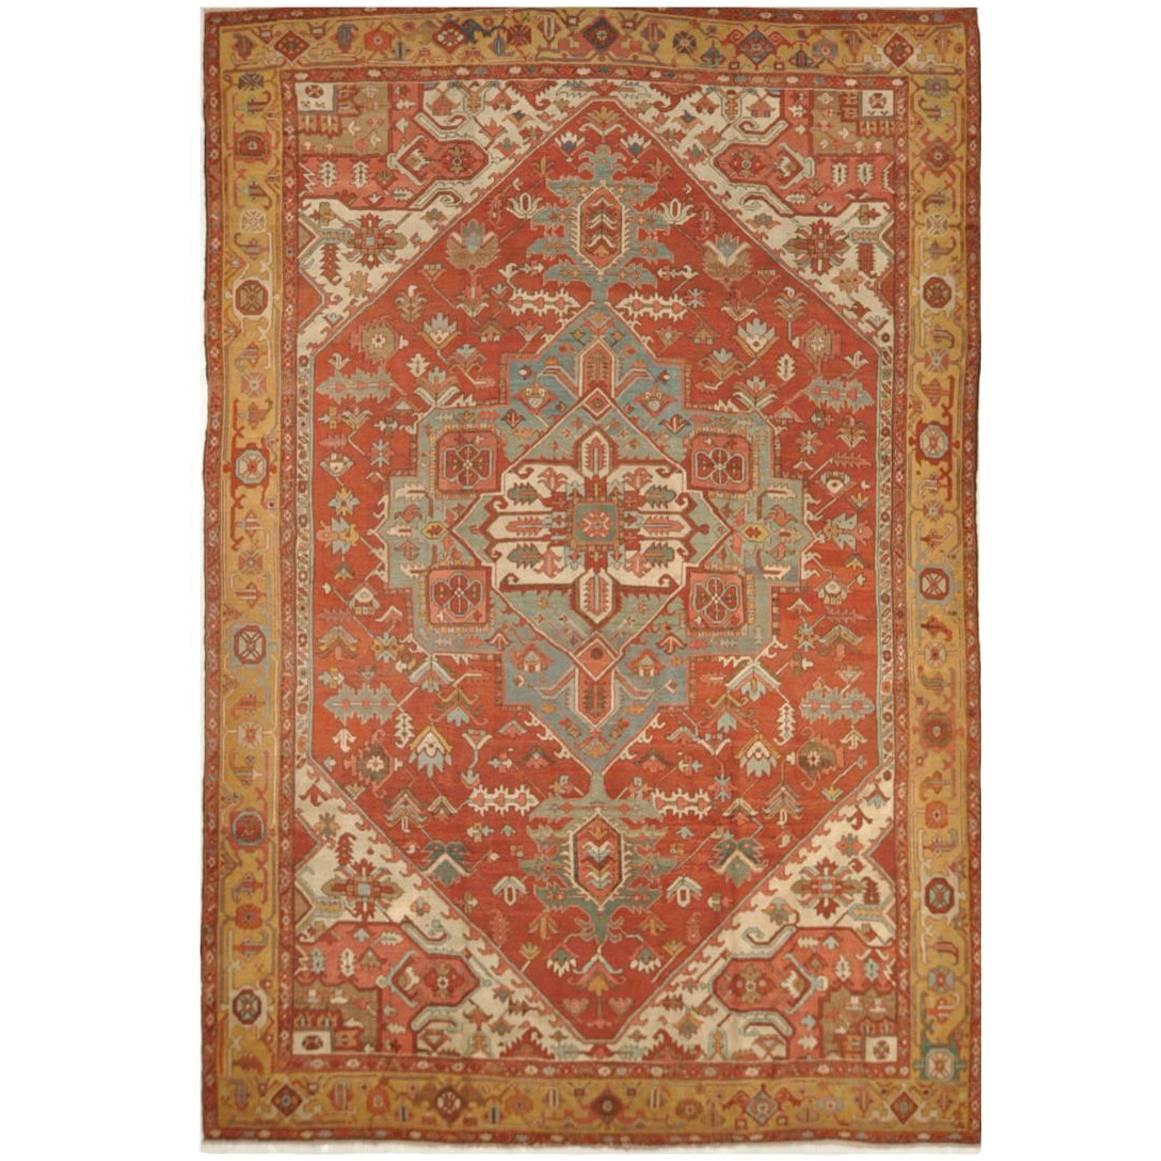 Large Room Size Antique Hand Knotted wool Red Teal and Gold Persian Serapi Rug For Sale